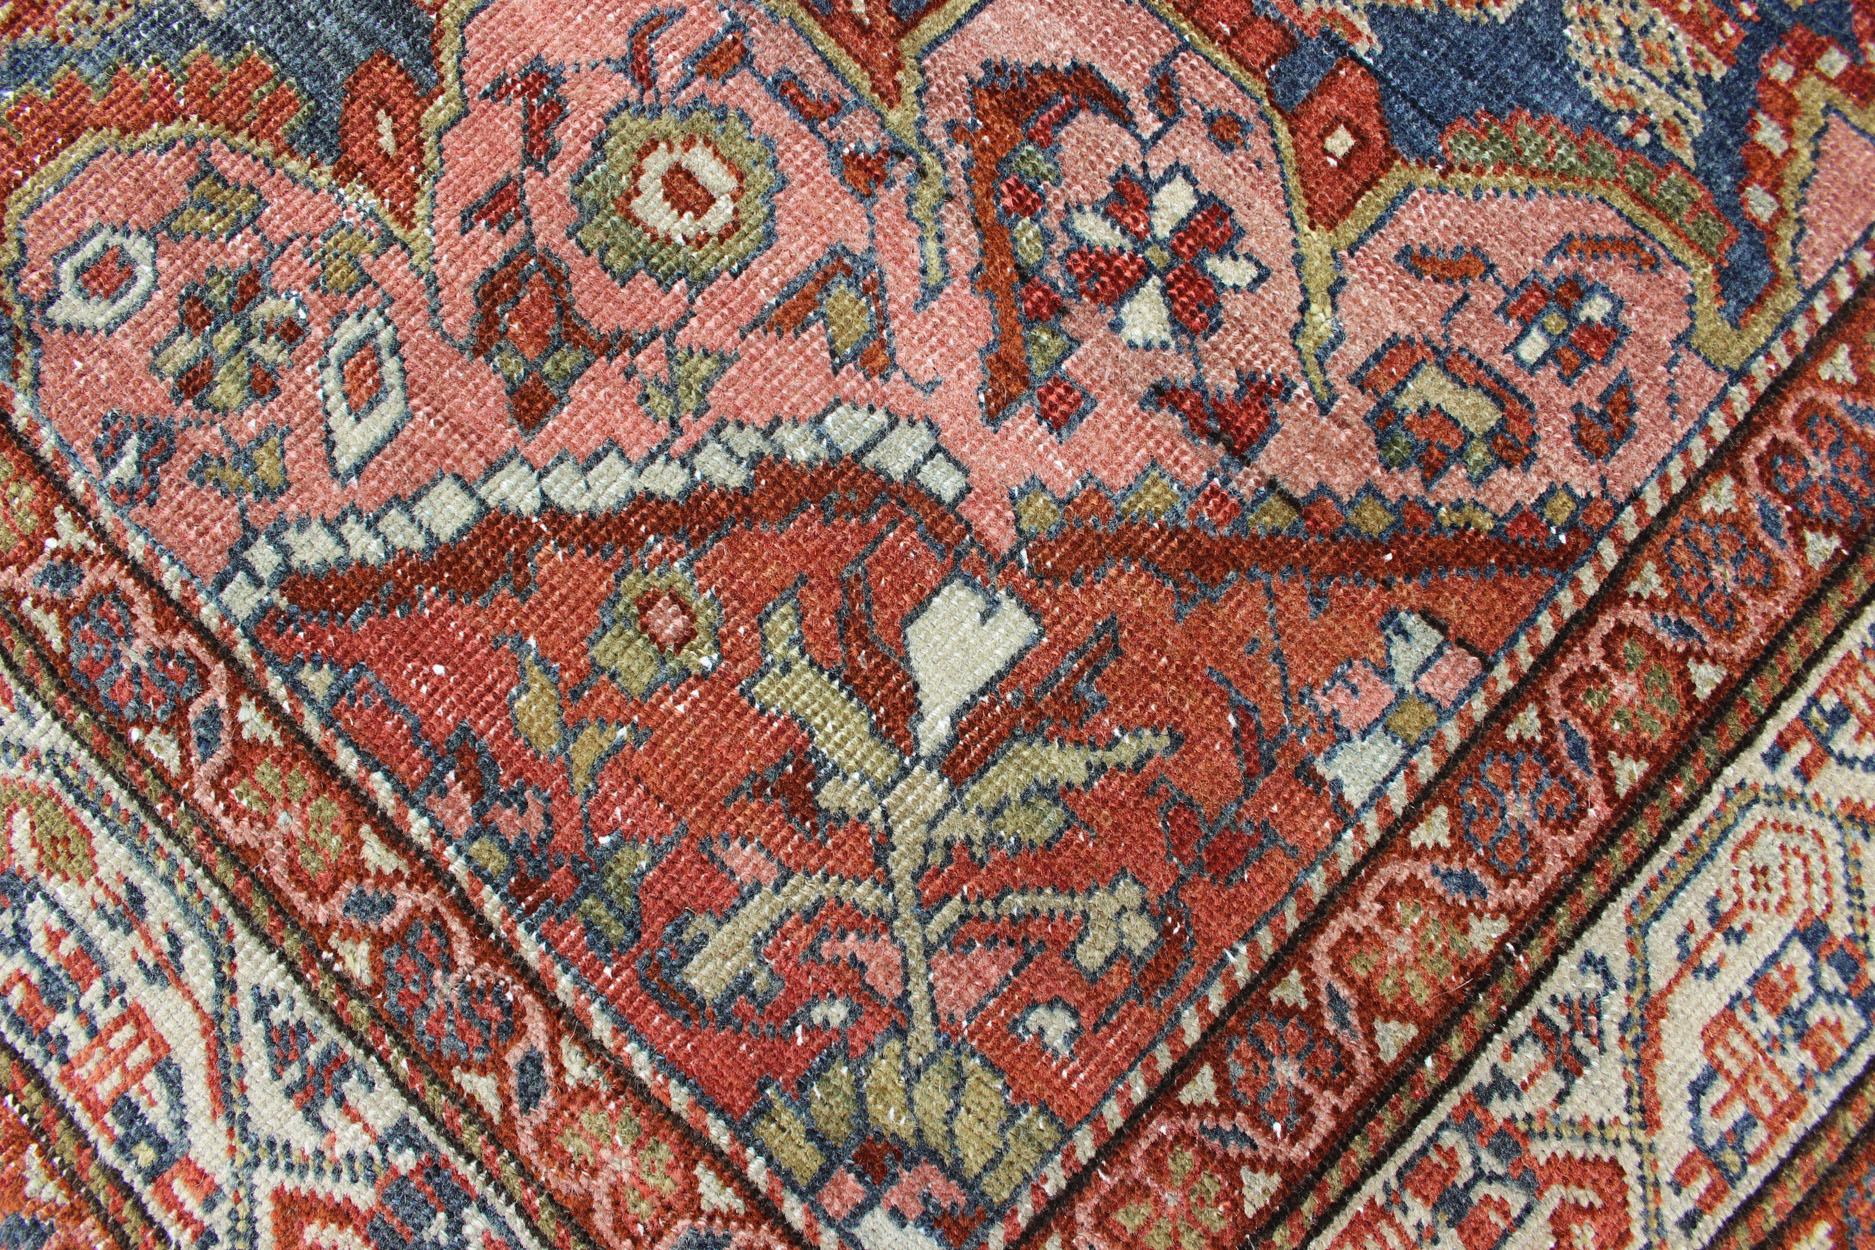 Colorful Antique Persian Hamadan Rug with Large Scale Paisley & Intricate Design For Sale 2